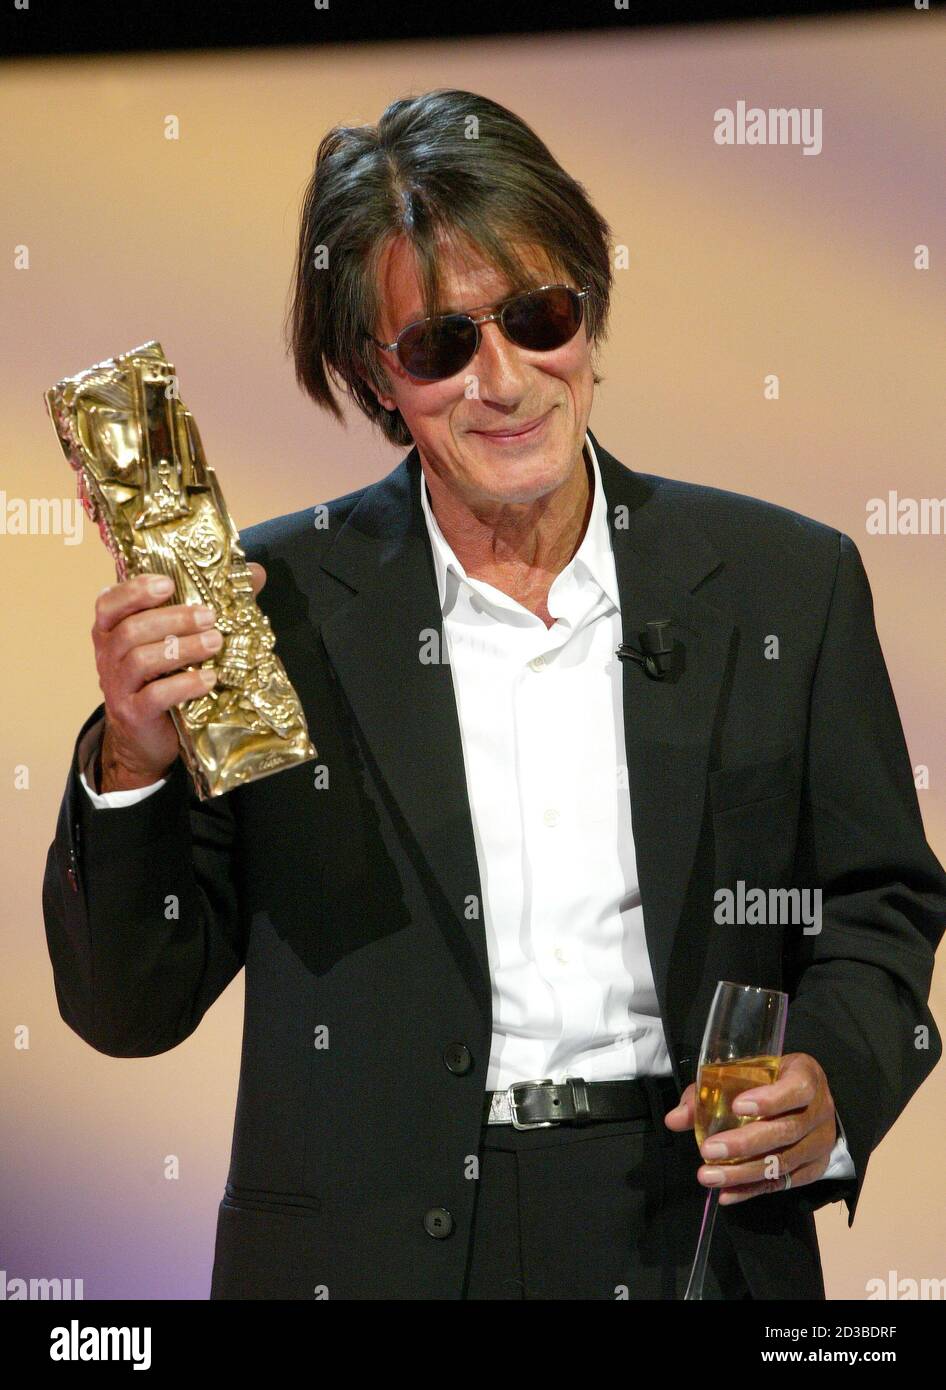 Dutronc Jacques High Resolution Stock Photography and Images - Alamy